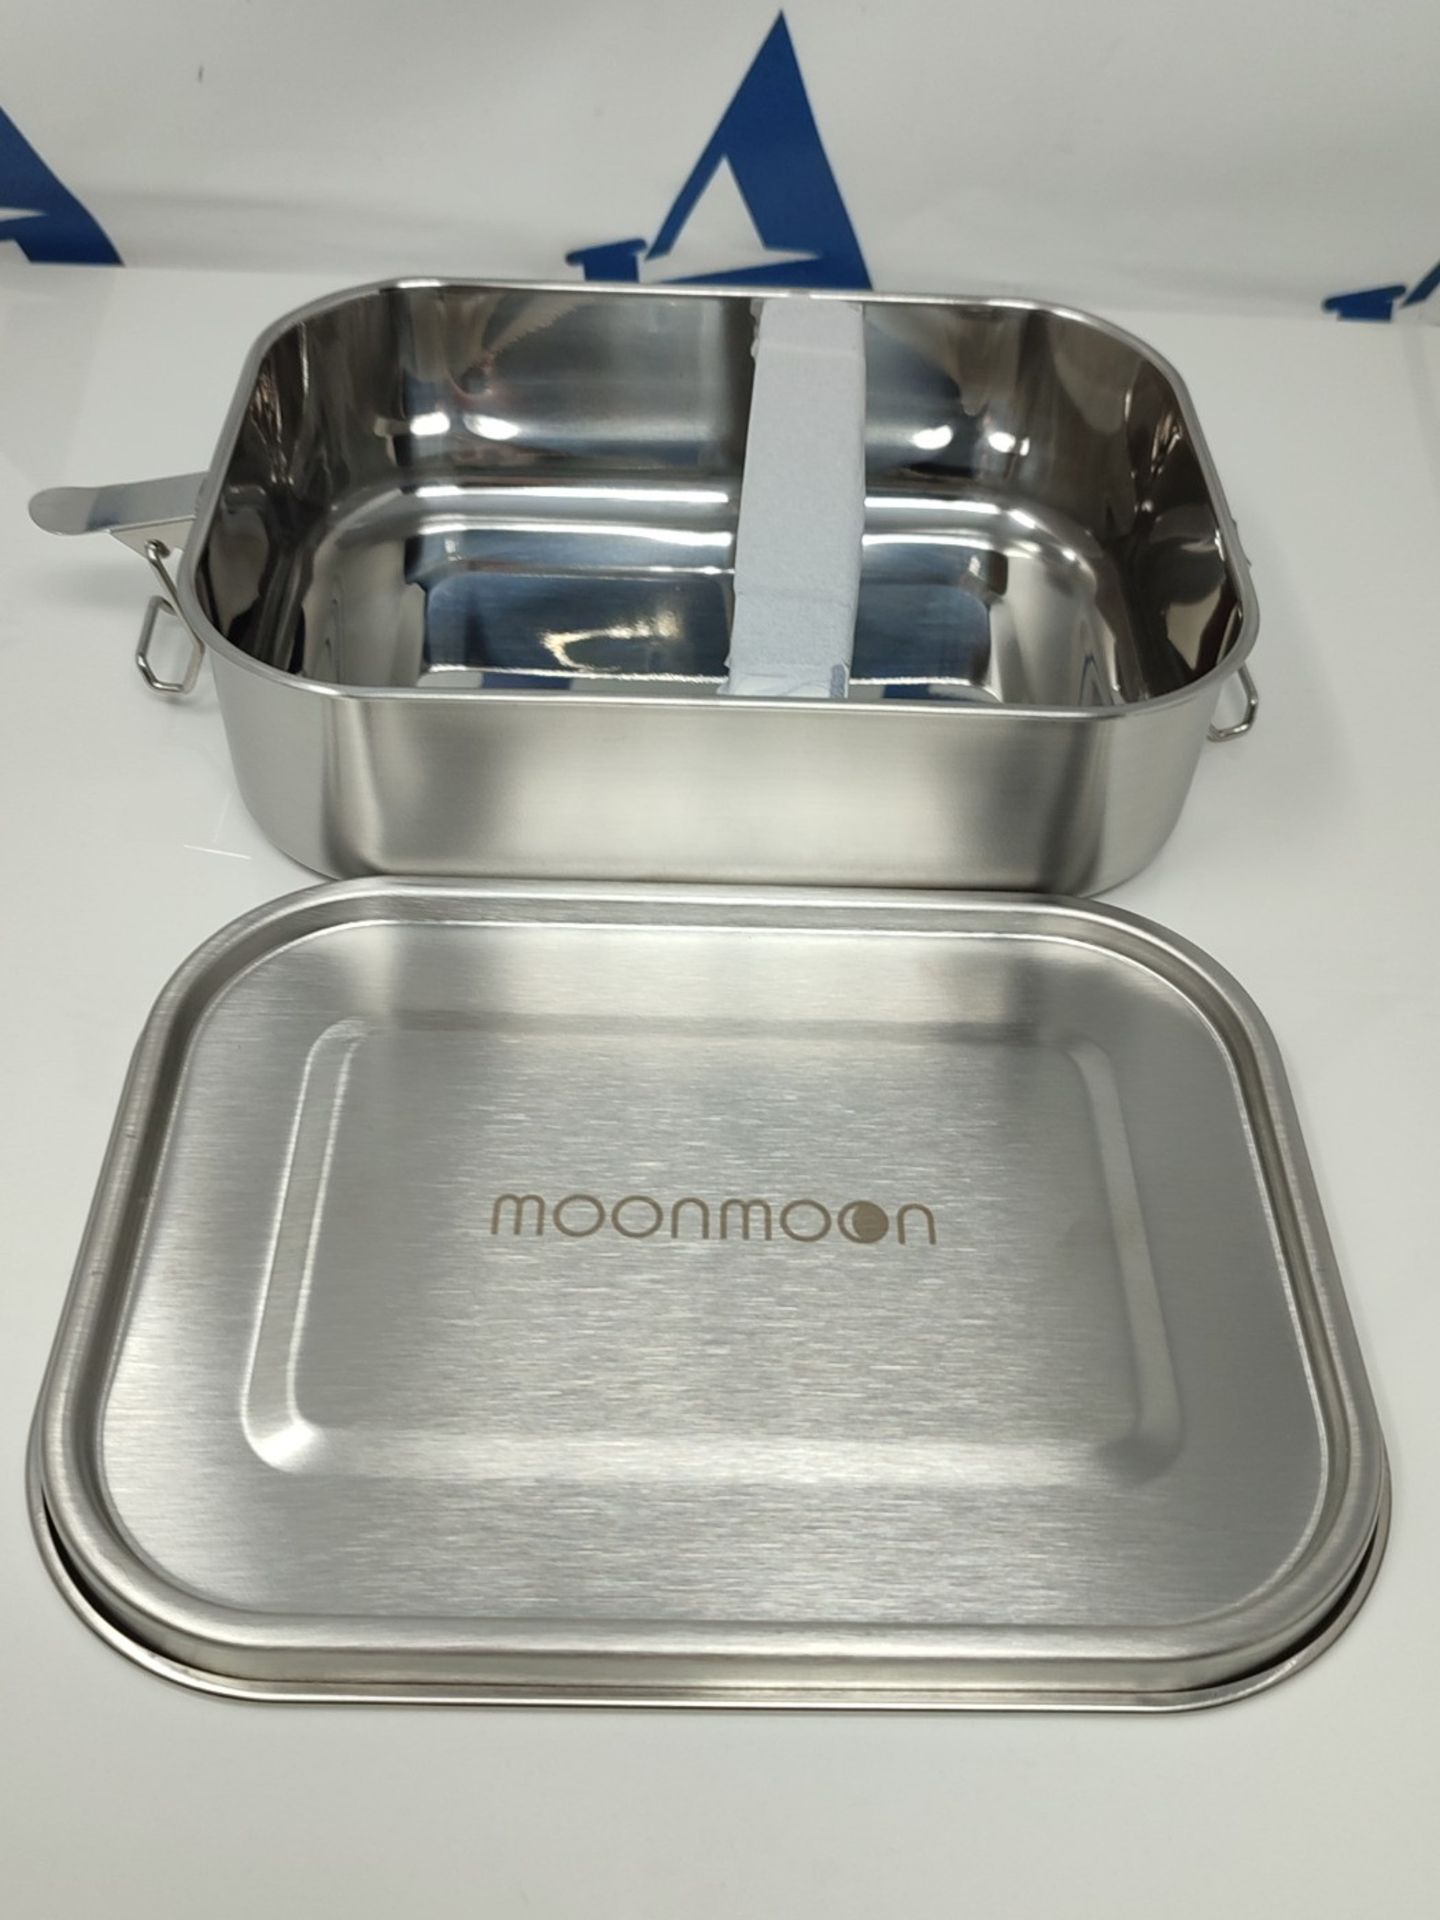 Moonmoon Stainless Steel Lunch Box | Eco-Friendly 1.2 Litre Leakproof Bento Box with c - Image 2 of 12